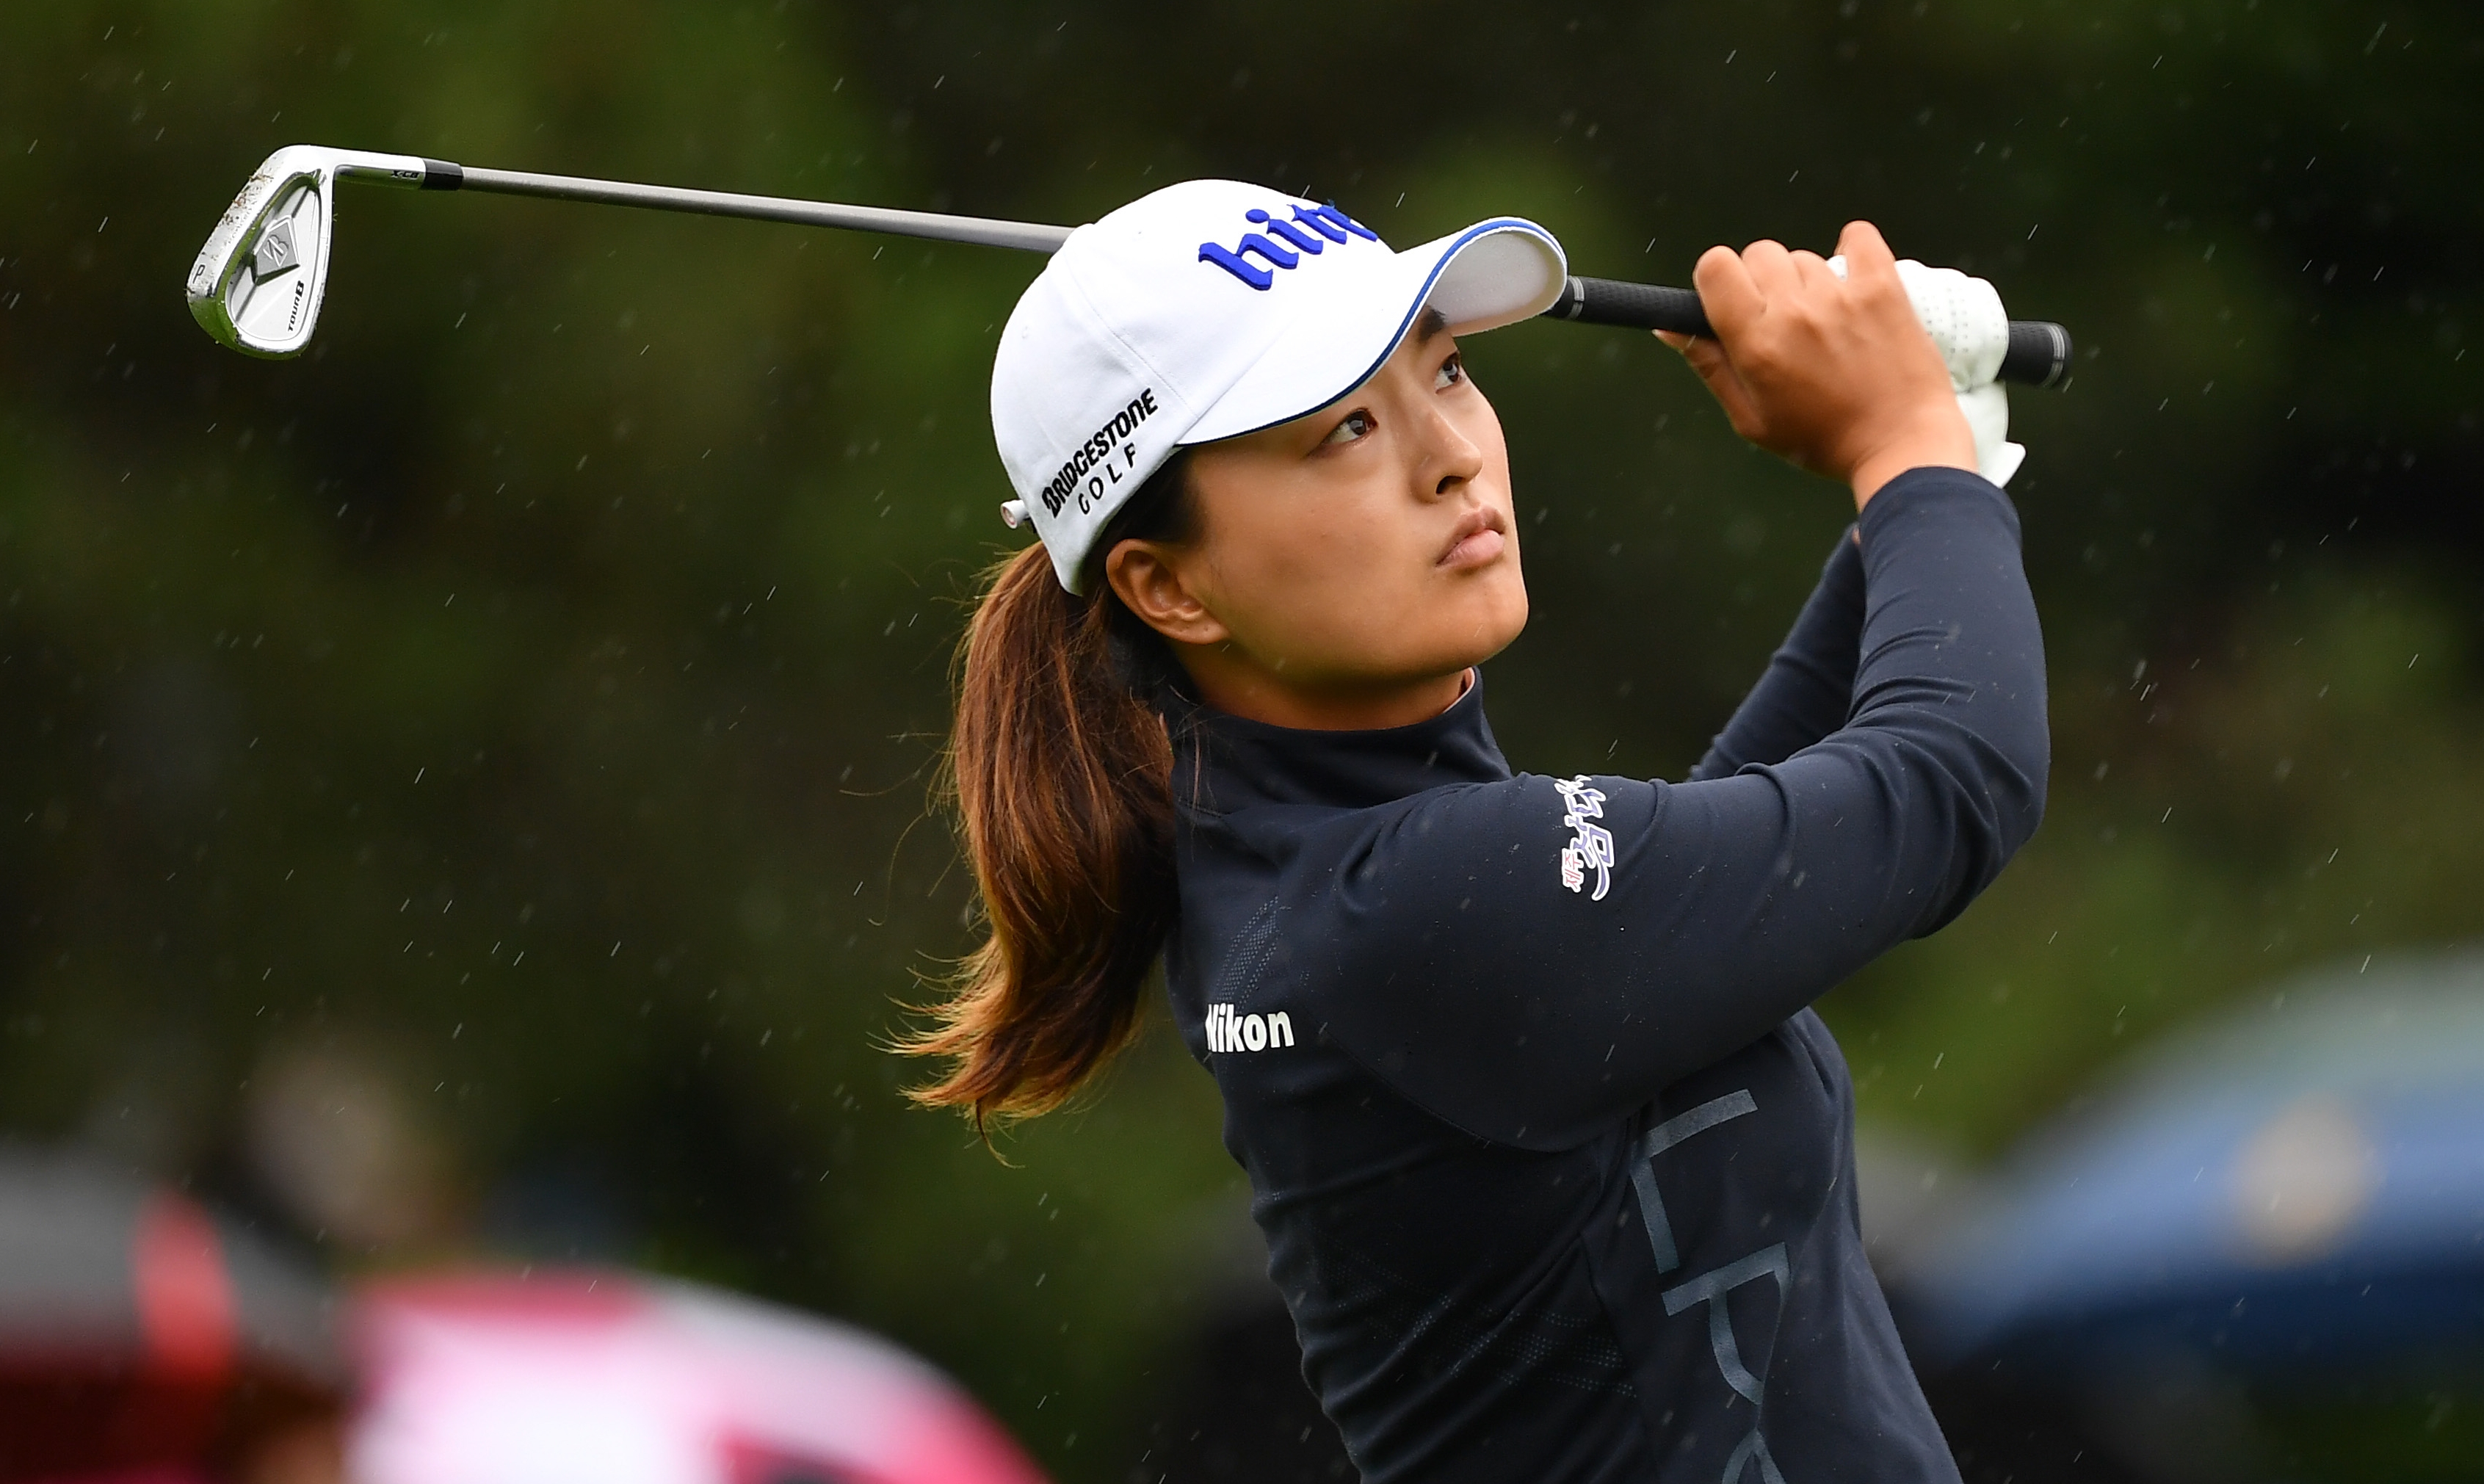 After nearly a year away, World No. 1 Jin Young Ko returns to the LPGA Tour  | Golf News and Tour Information | GolfDigest.com